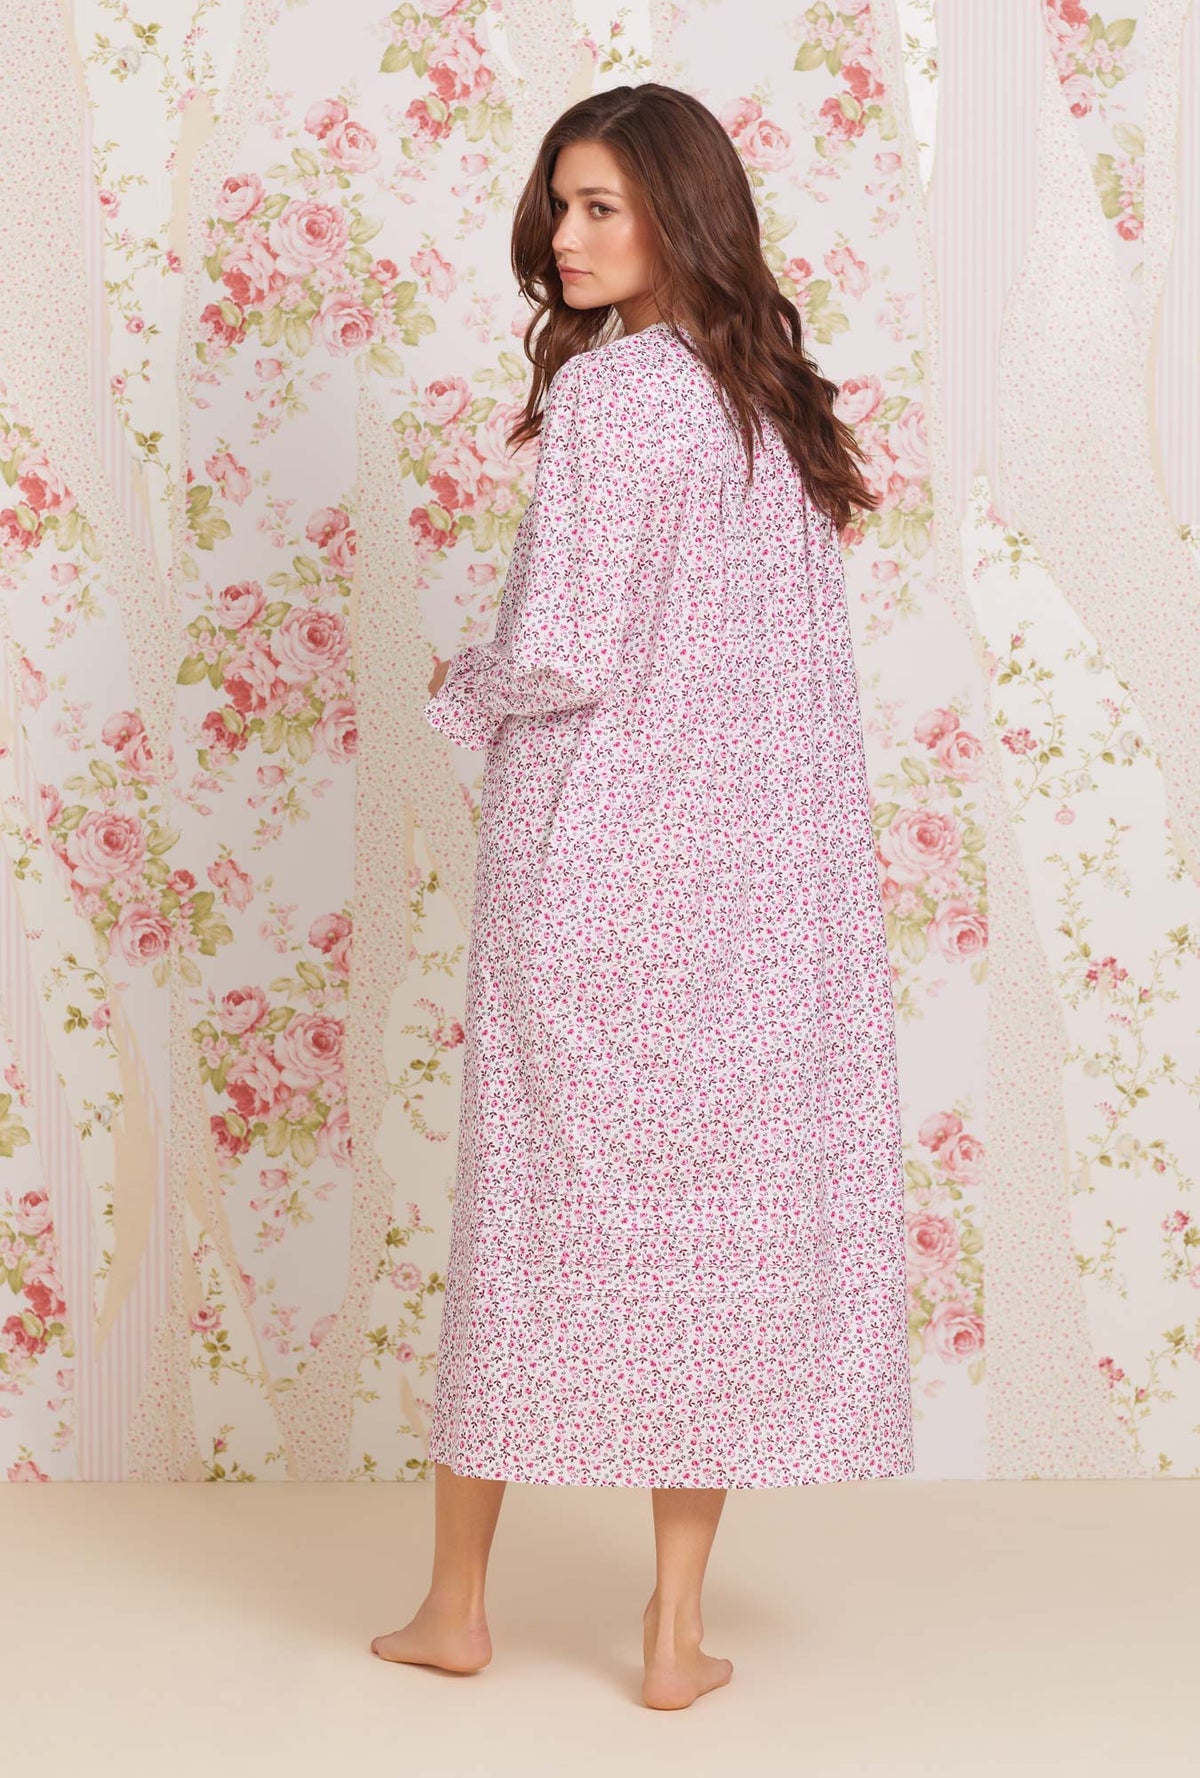 A lady wearing long sleeve eileen cotton lawn nightgown with rose jubilee print.